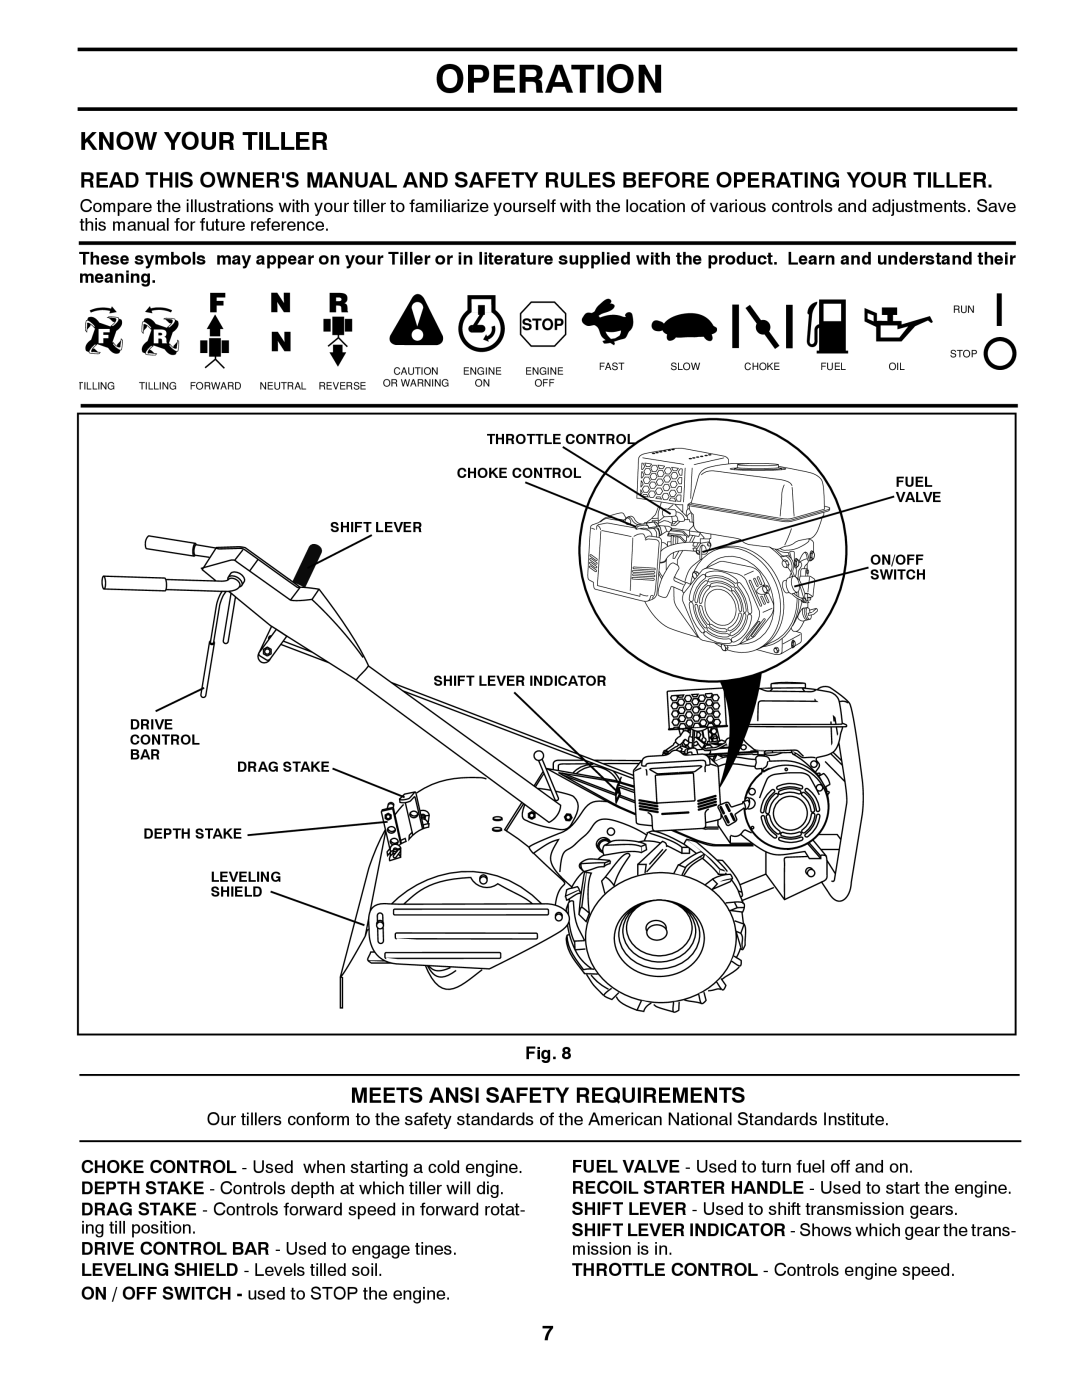 Husqvarna DRT 900 Operation, Know Your Tiller, Read This Owners Manual And Safety Rules Before Operating Your Tiller 